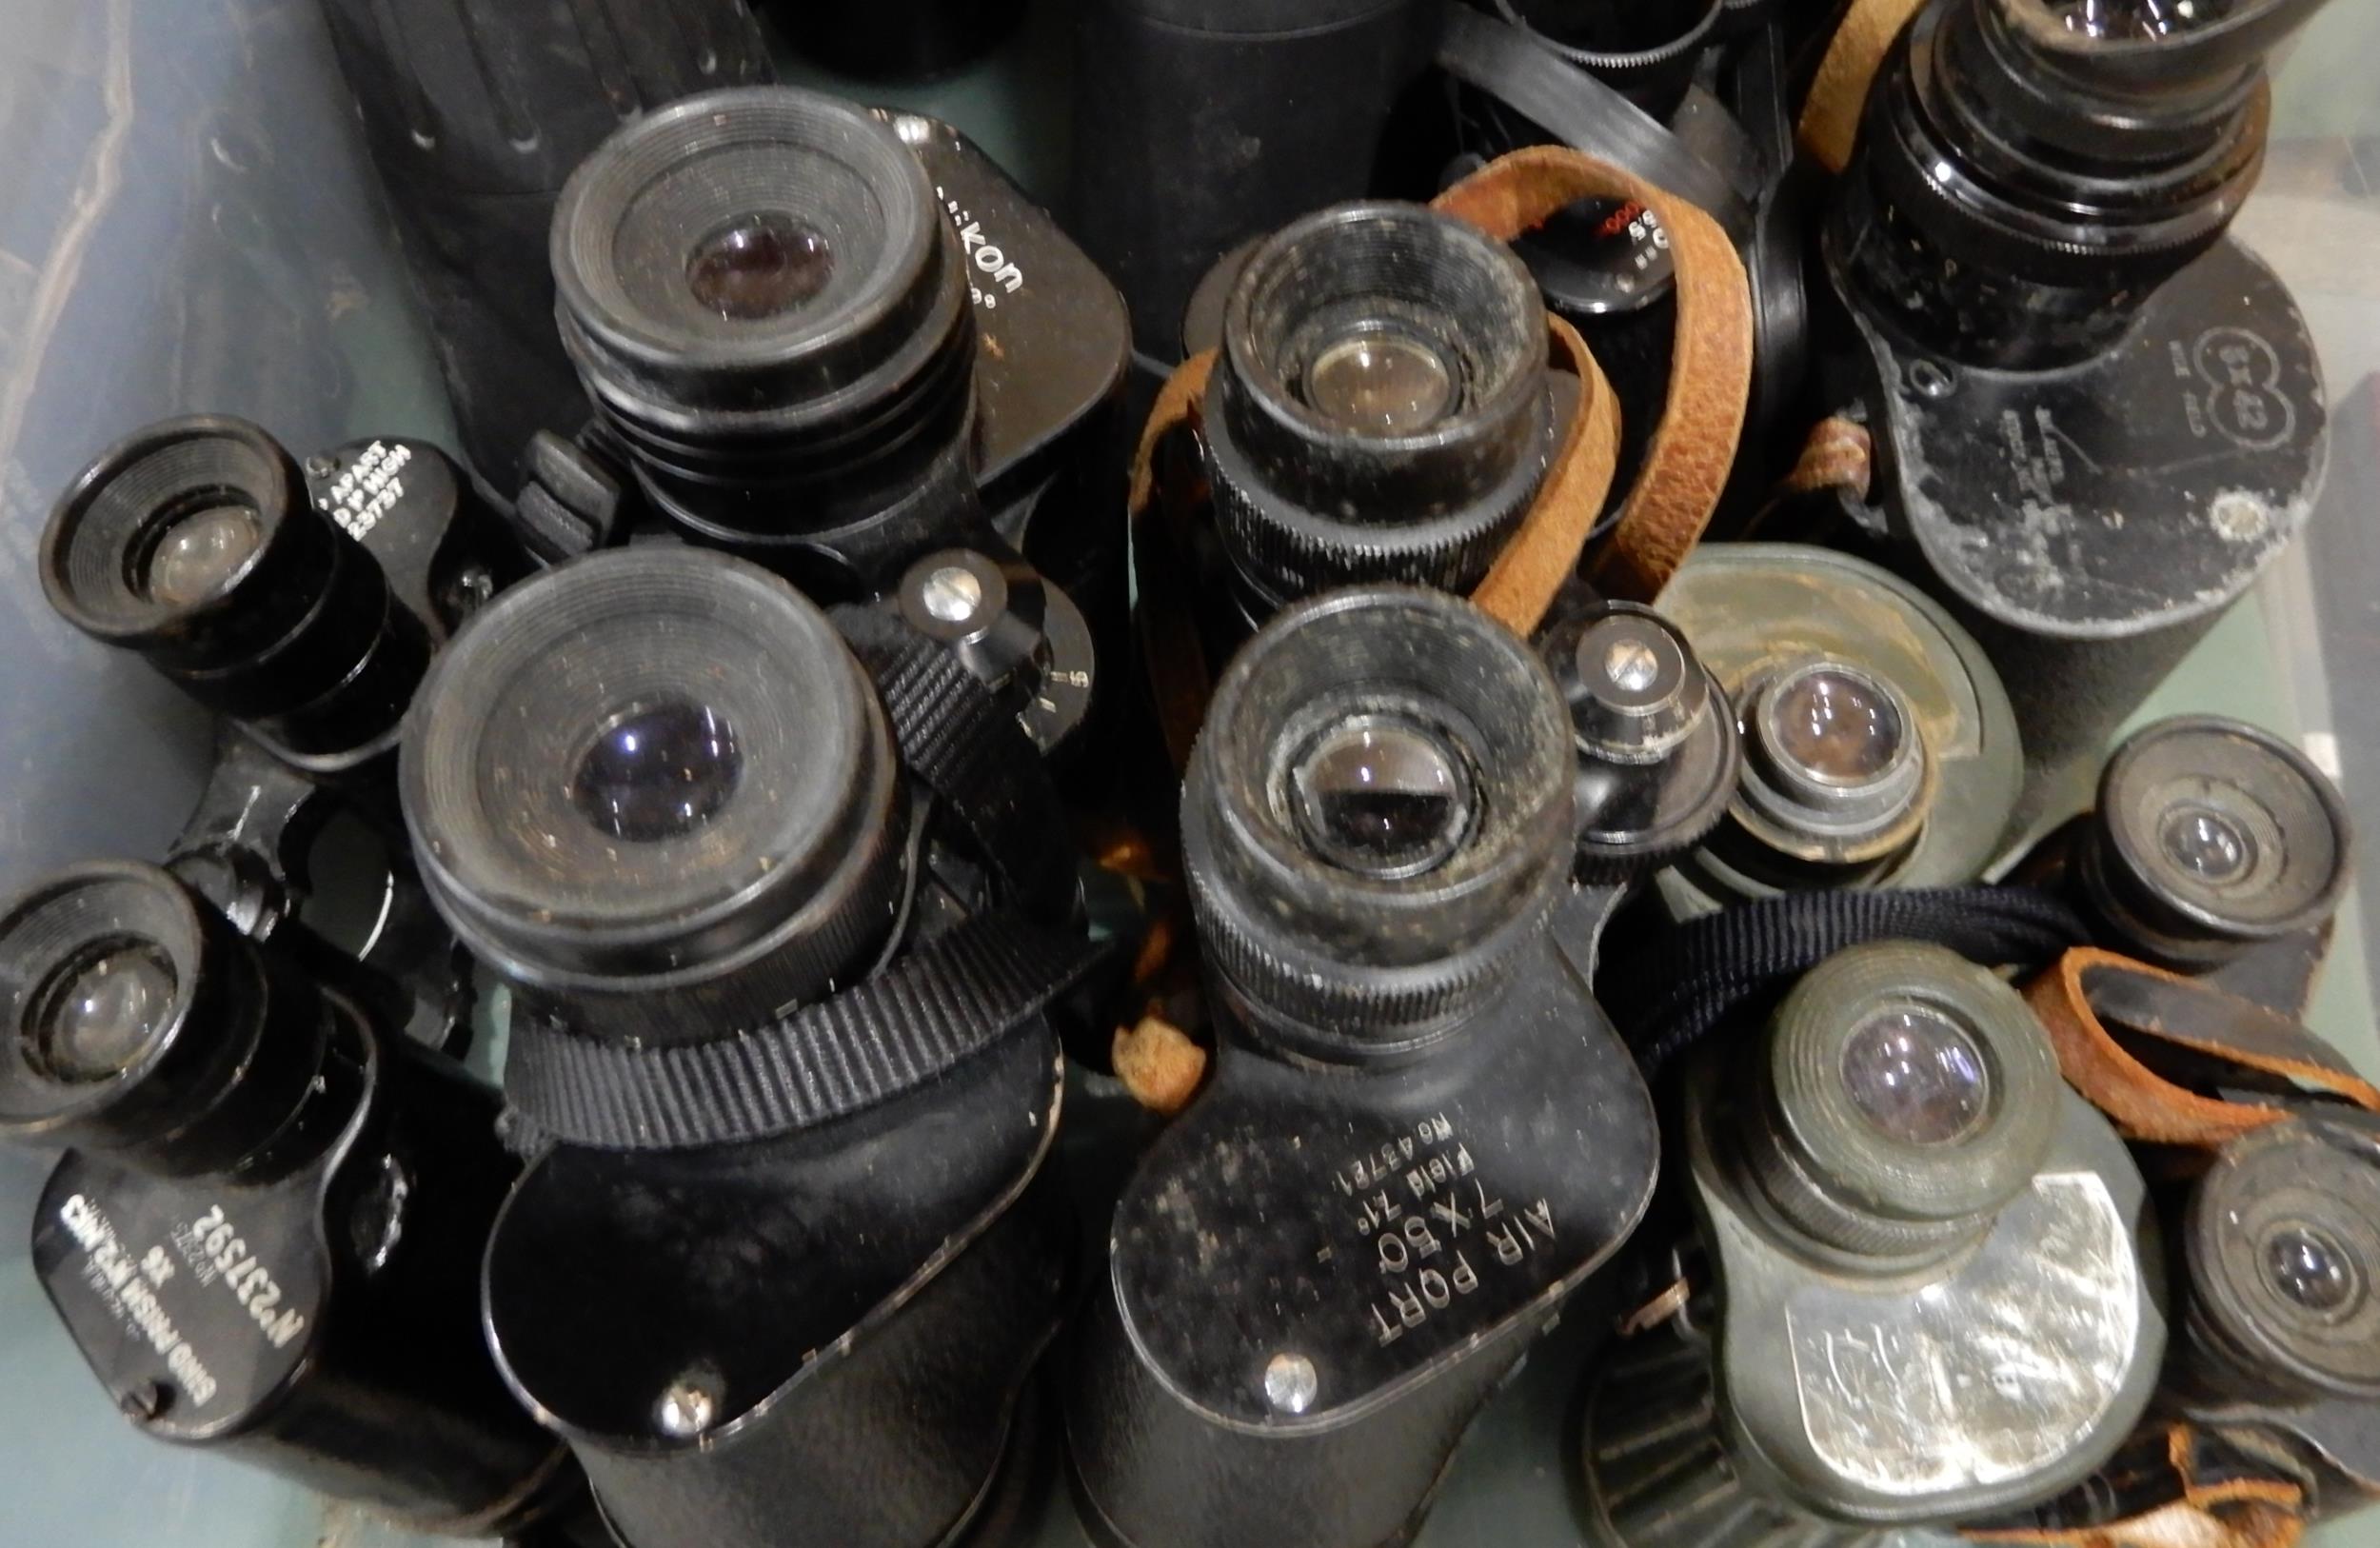 A quantity of binoculars with various makers and models with Nikon, Pentax, E. Leitz, Carl Zeiss, - Image 2 of 19